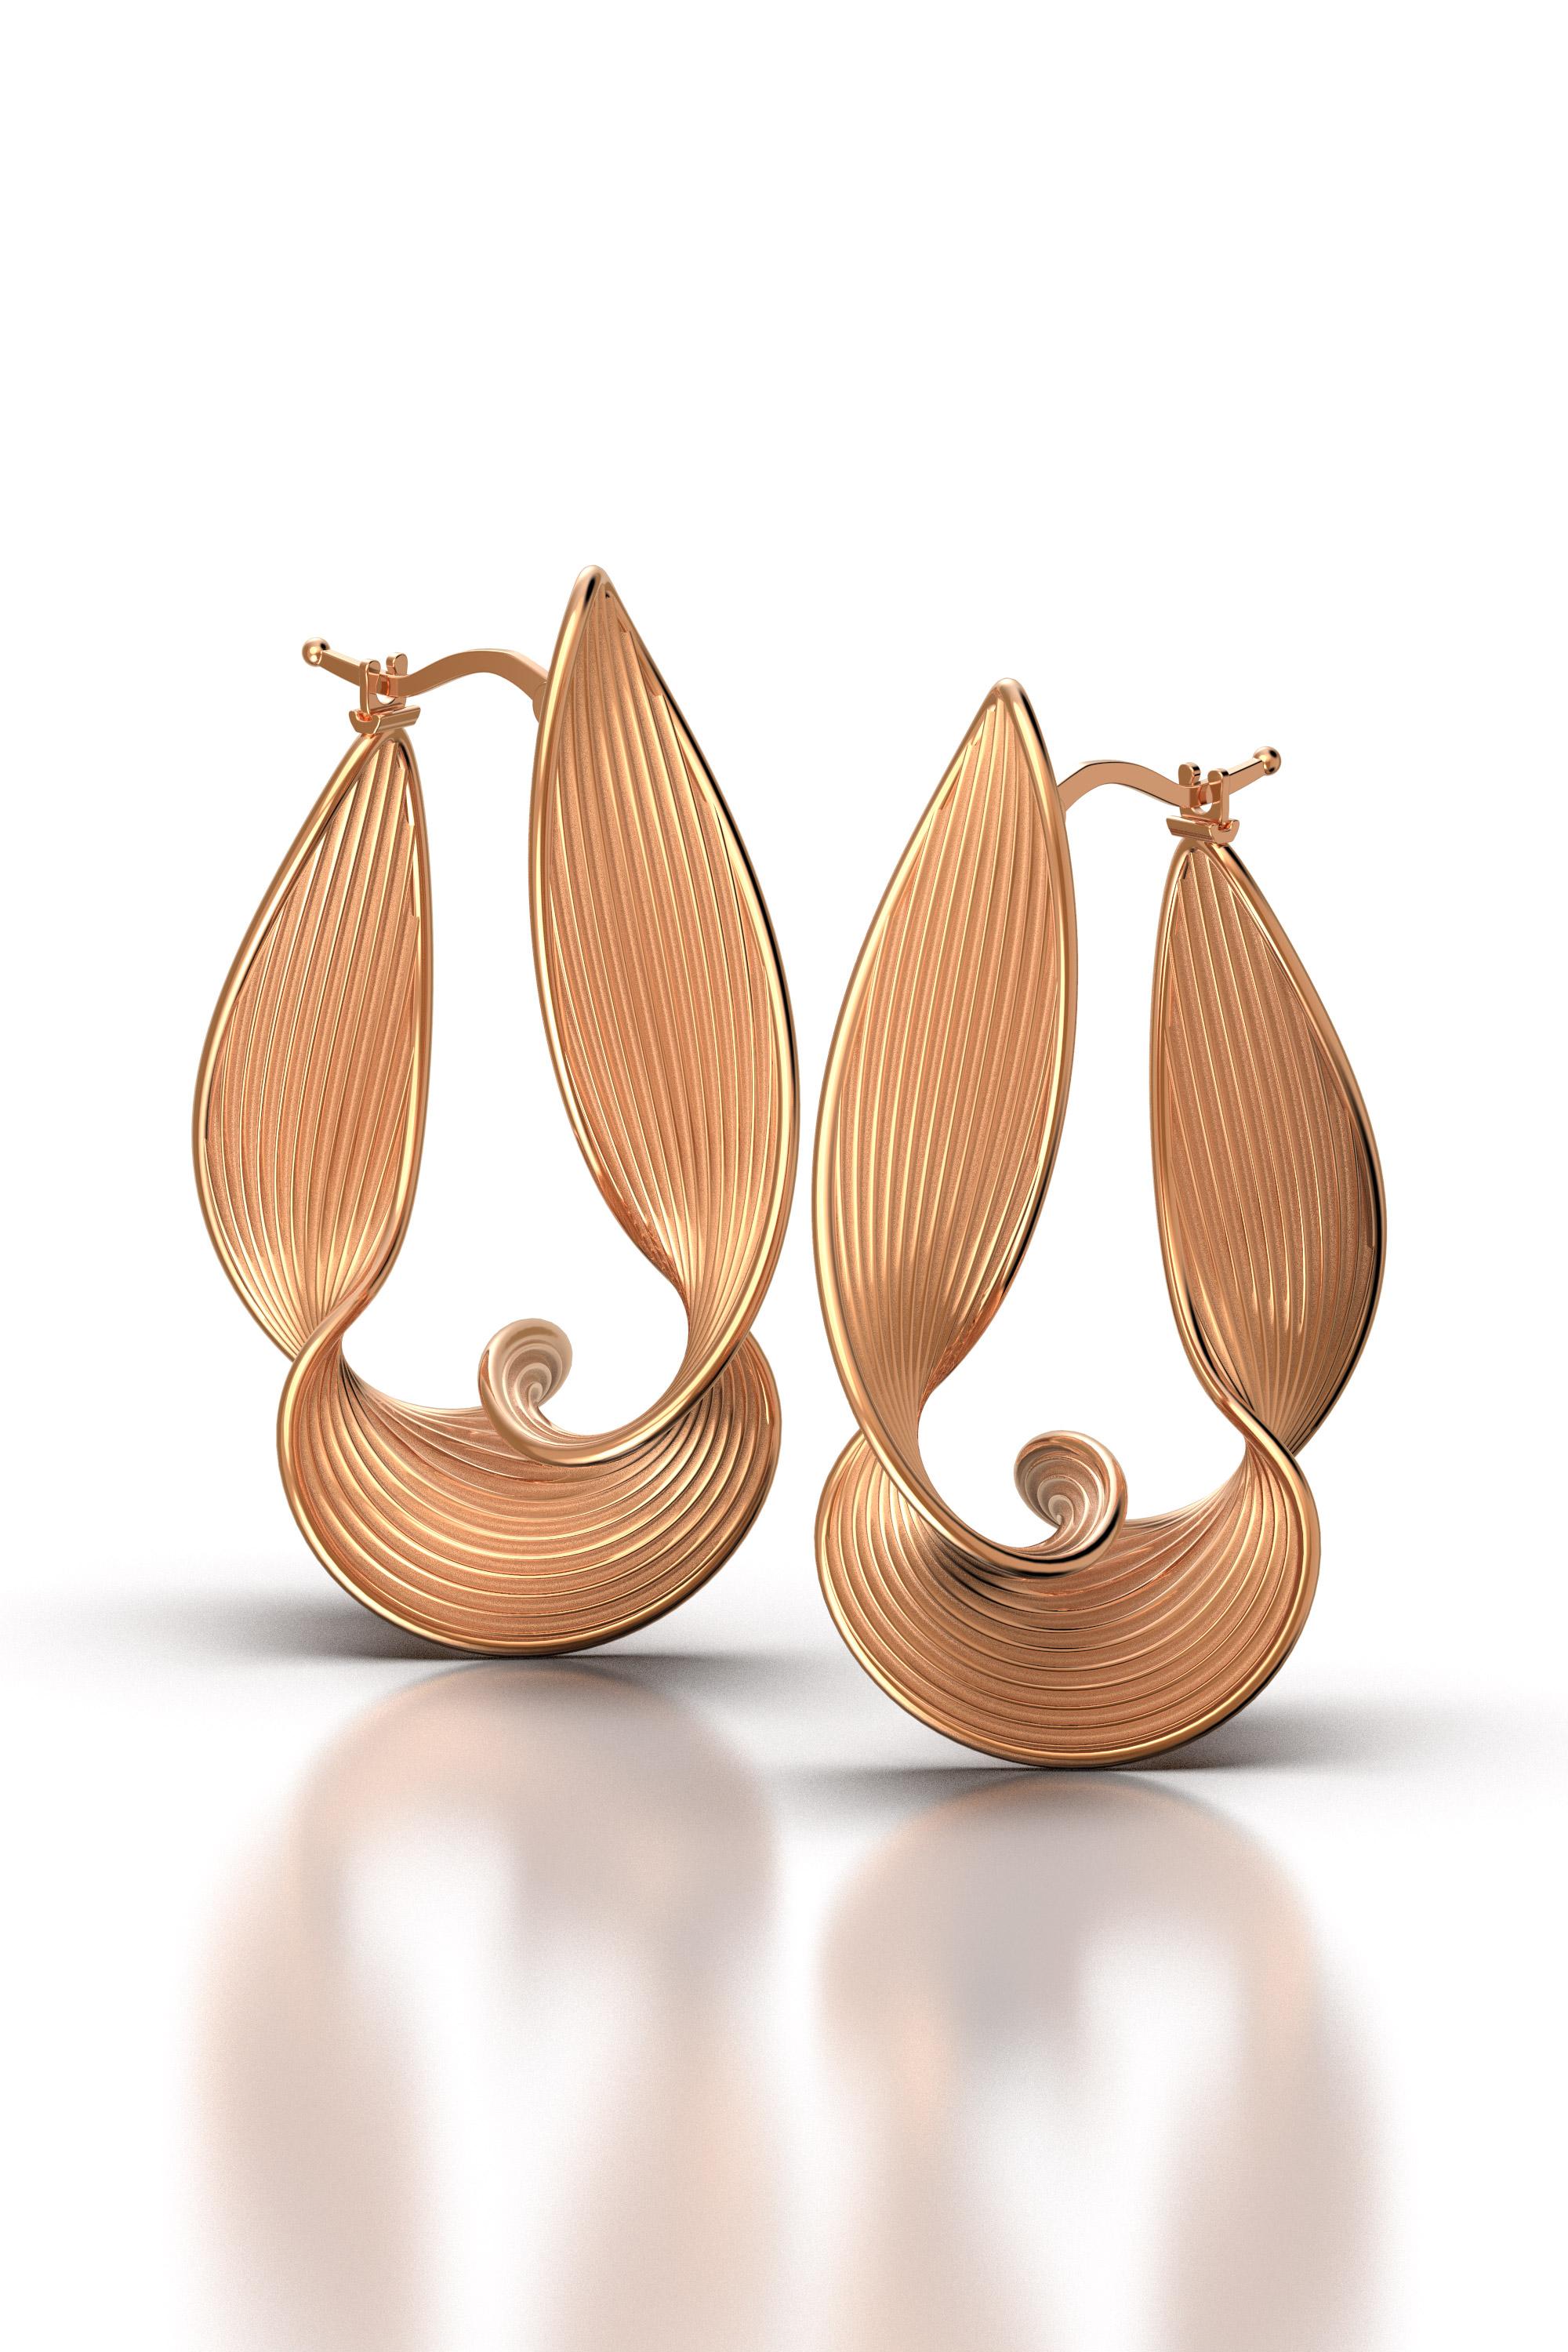 Stunning 18k Gold Twisted Hoop Earrings by Oltremare Gioielli Italian Jewelry In New Condition For Sale In Camisano Vicentino, VI